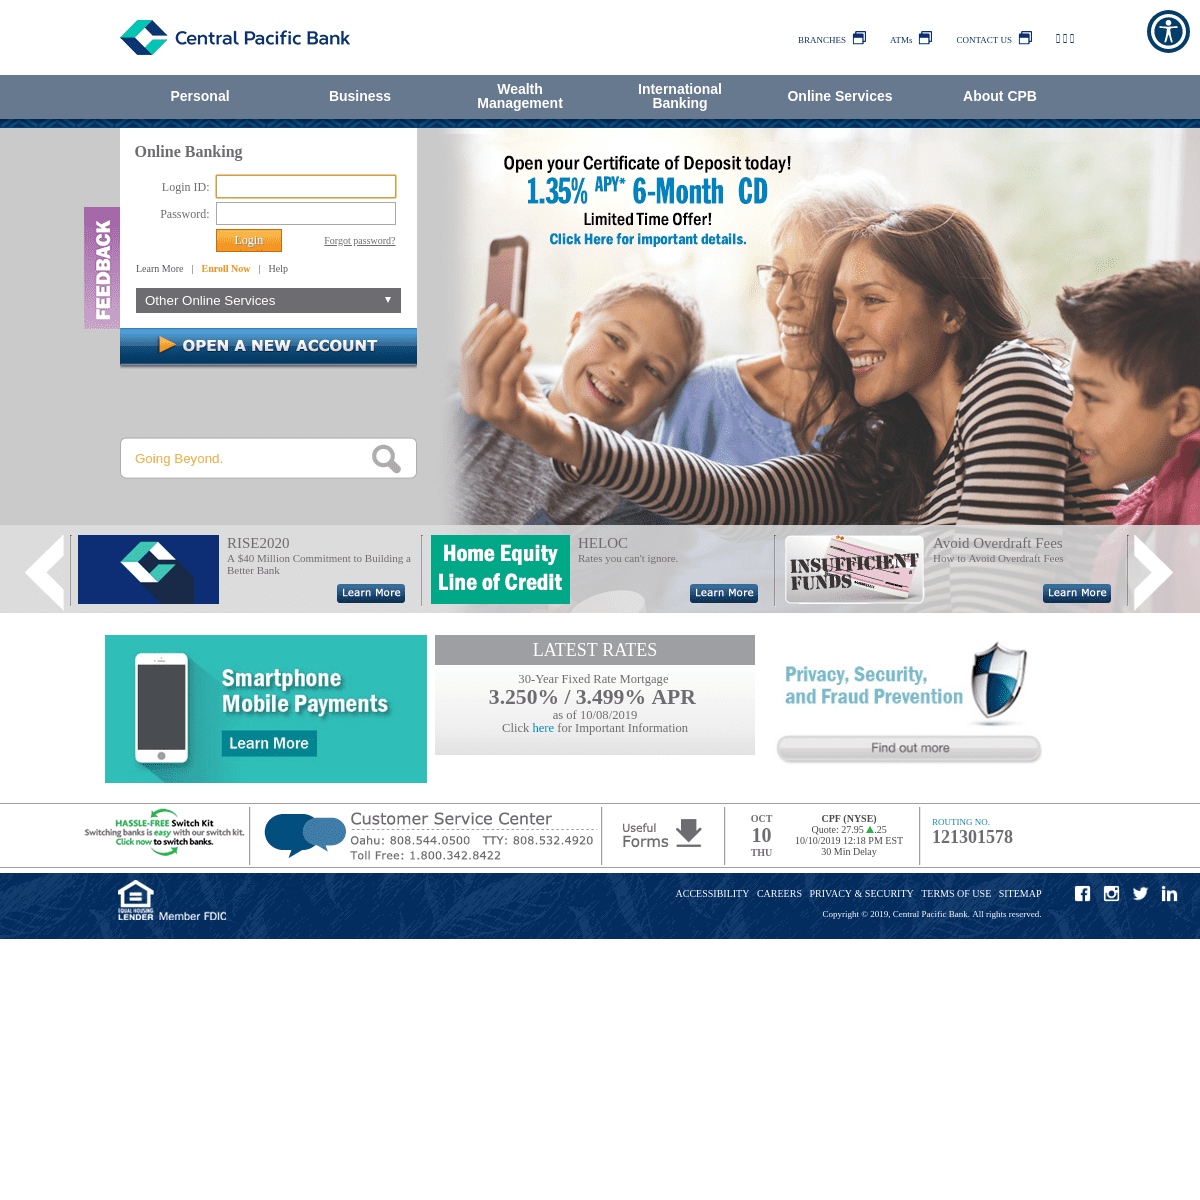 A complete backup of centralpacificbank.com